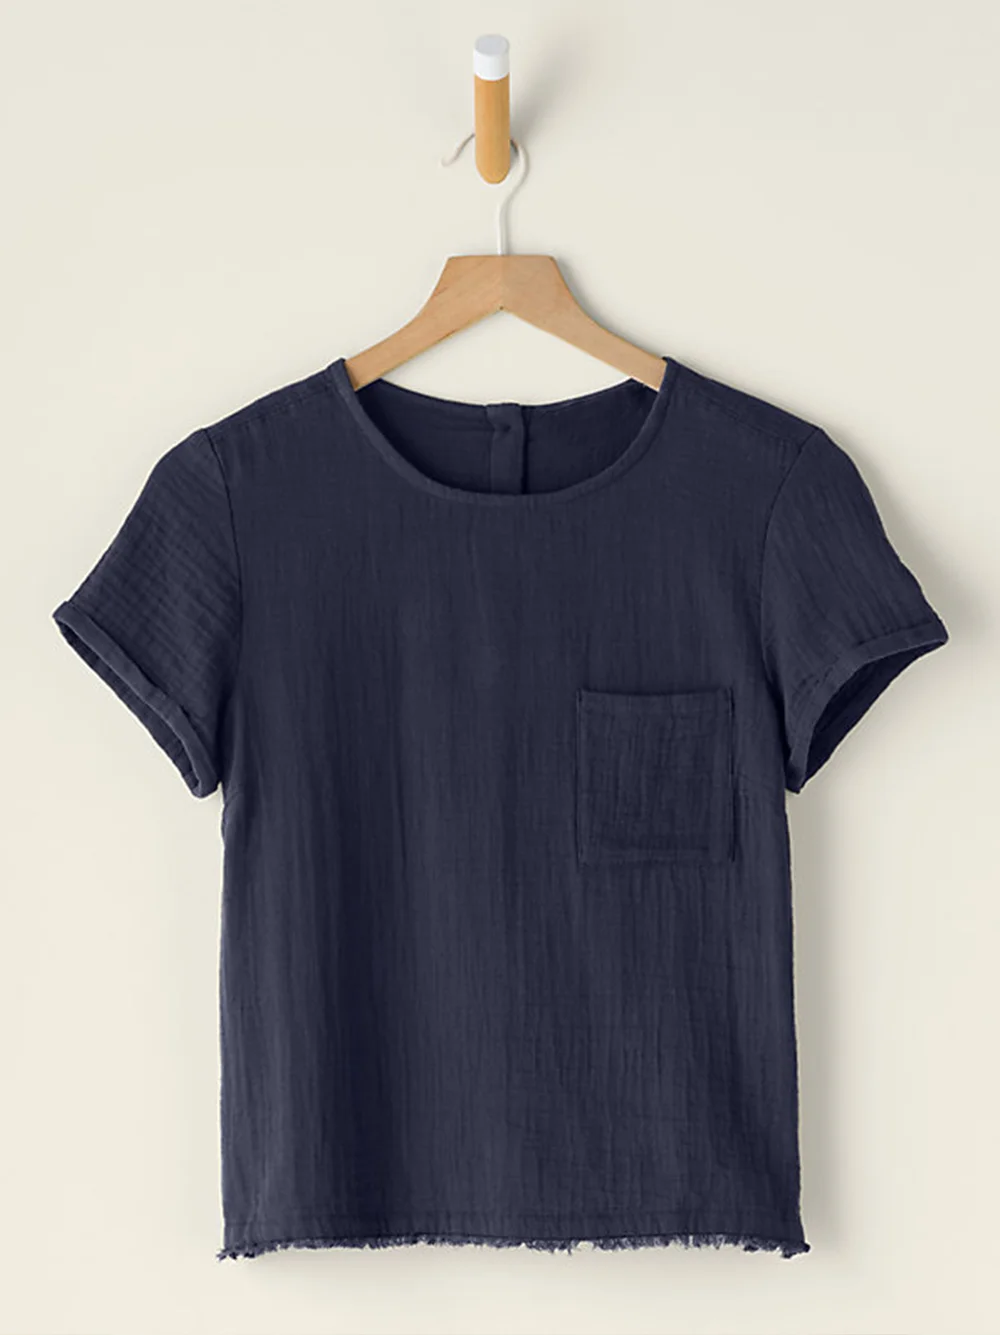 Women's Solid Color Round Neck Short Sleeve Pocket Top